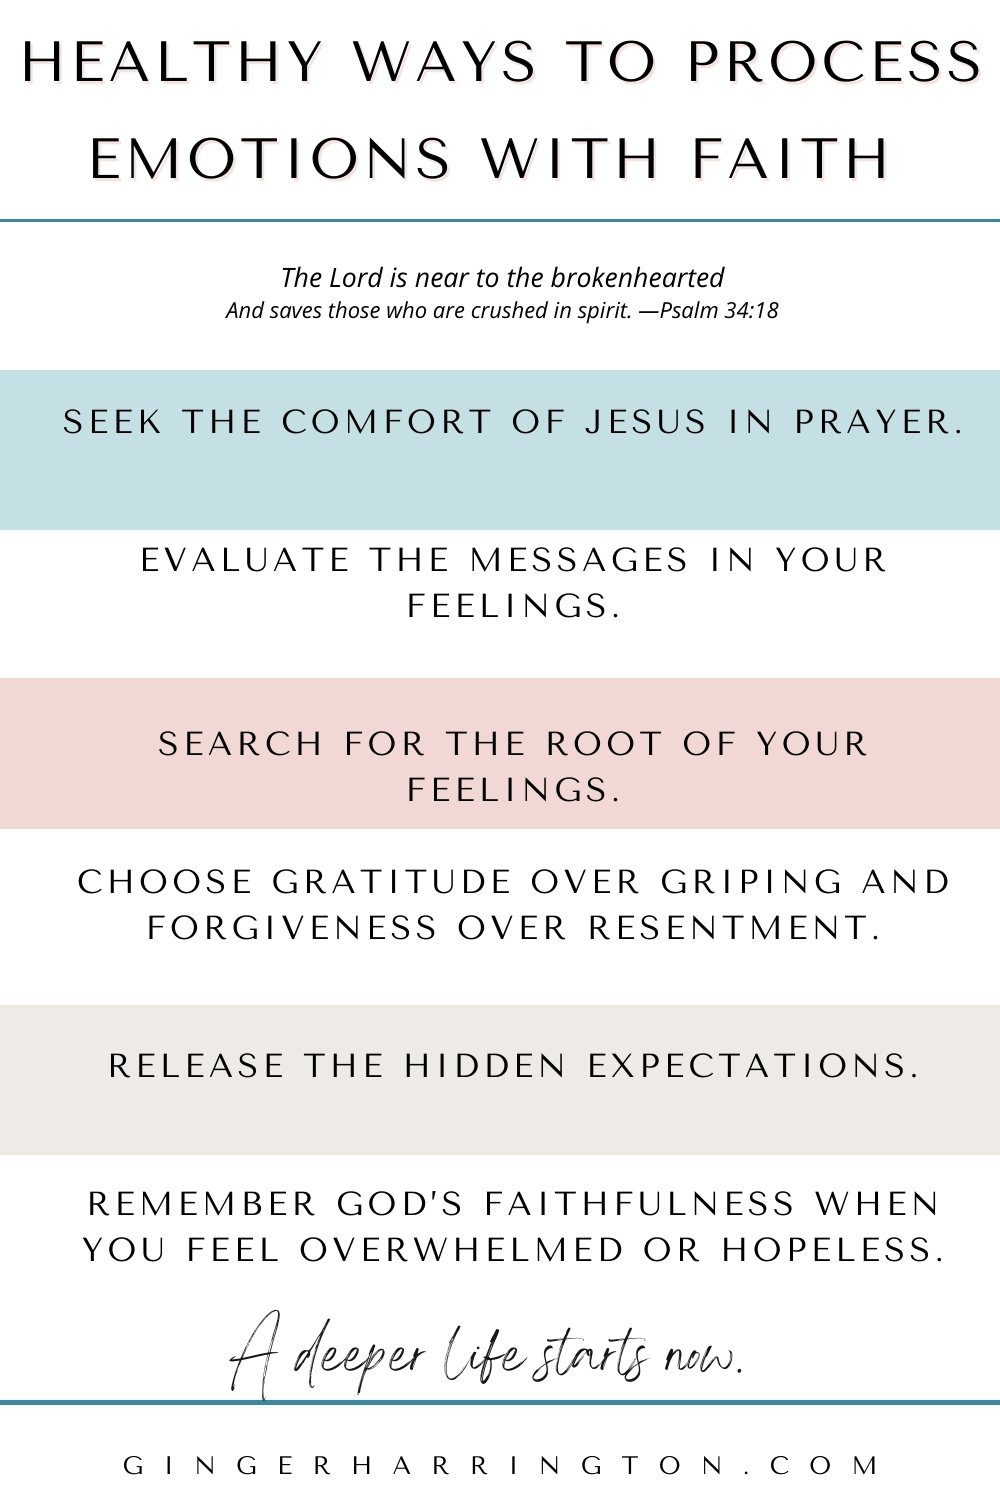 Infograph displays steps to process feelings with faith.